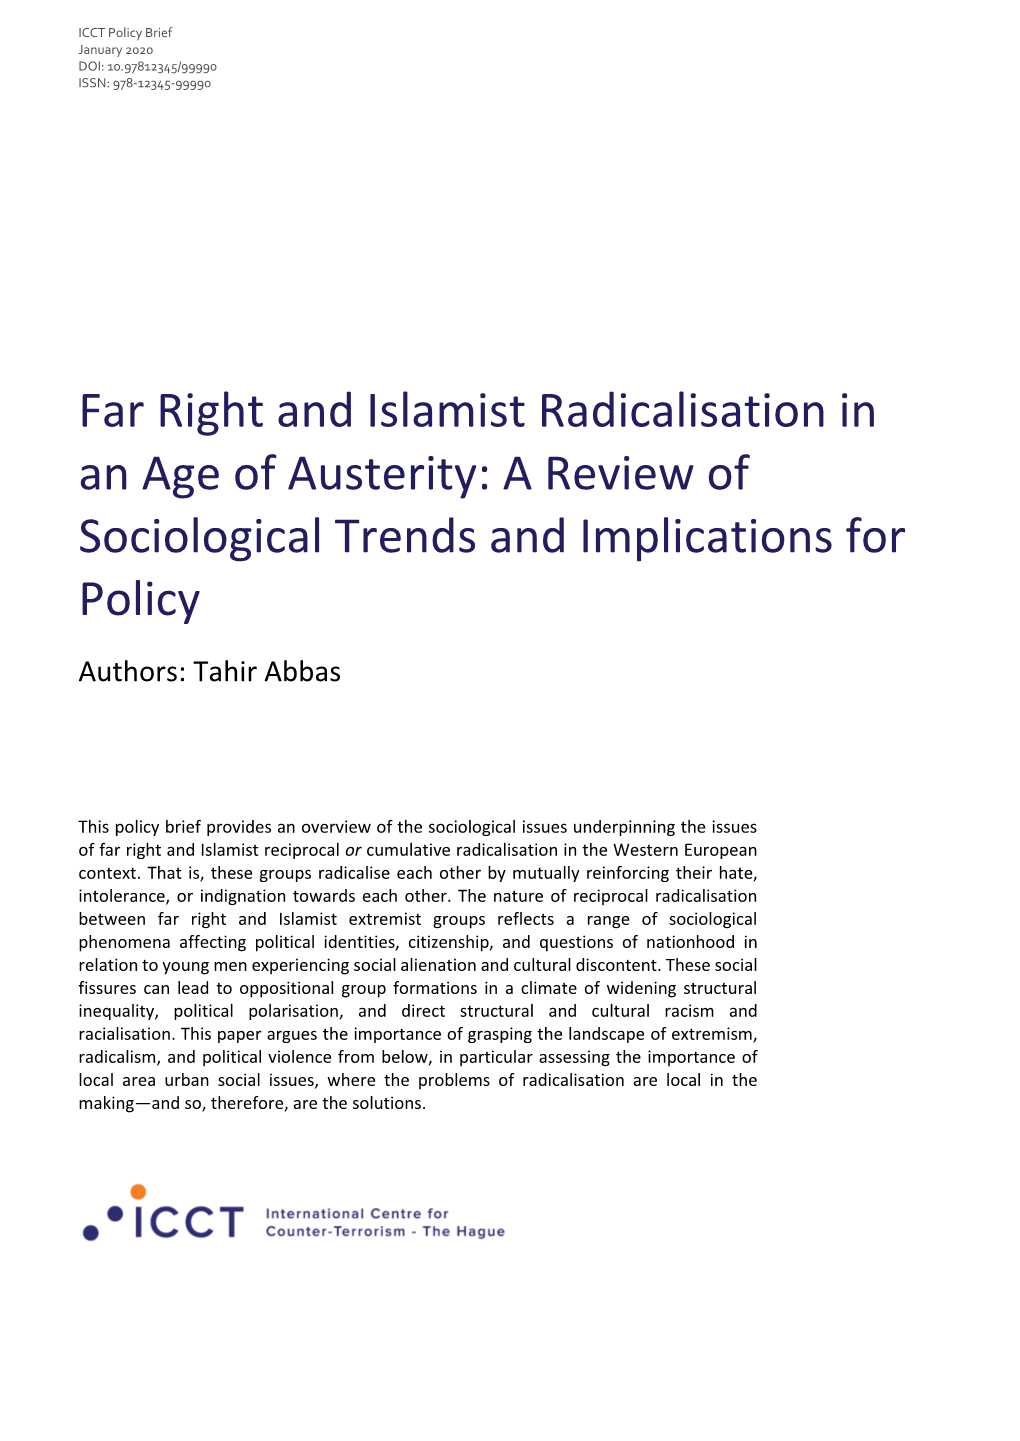 Far Right and Islamist Radicalisation in an Age of Austerity: a Review of Sociological Trends and Implications for Policy